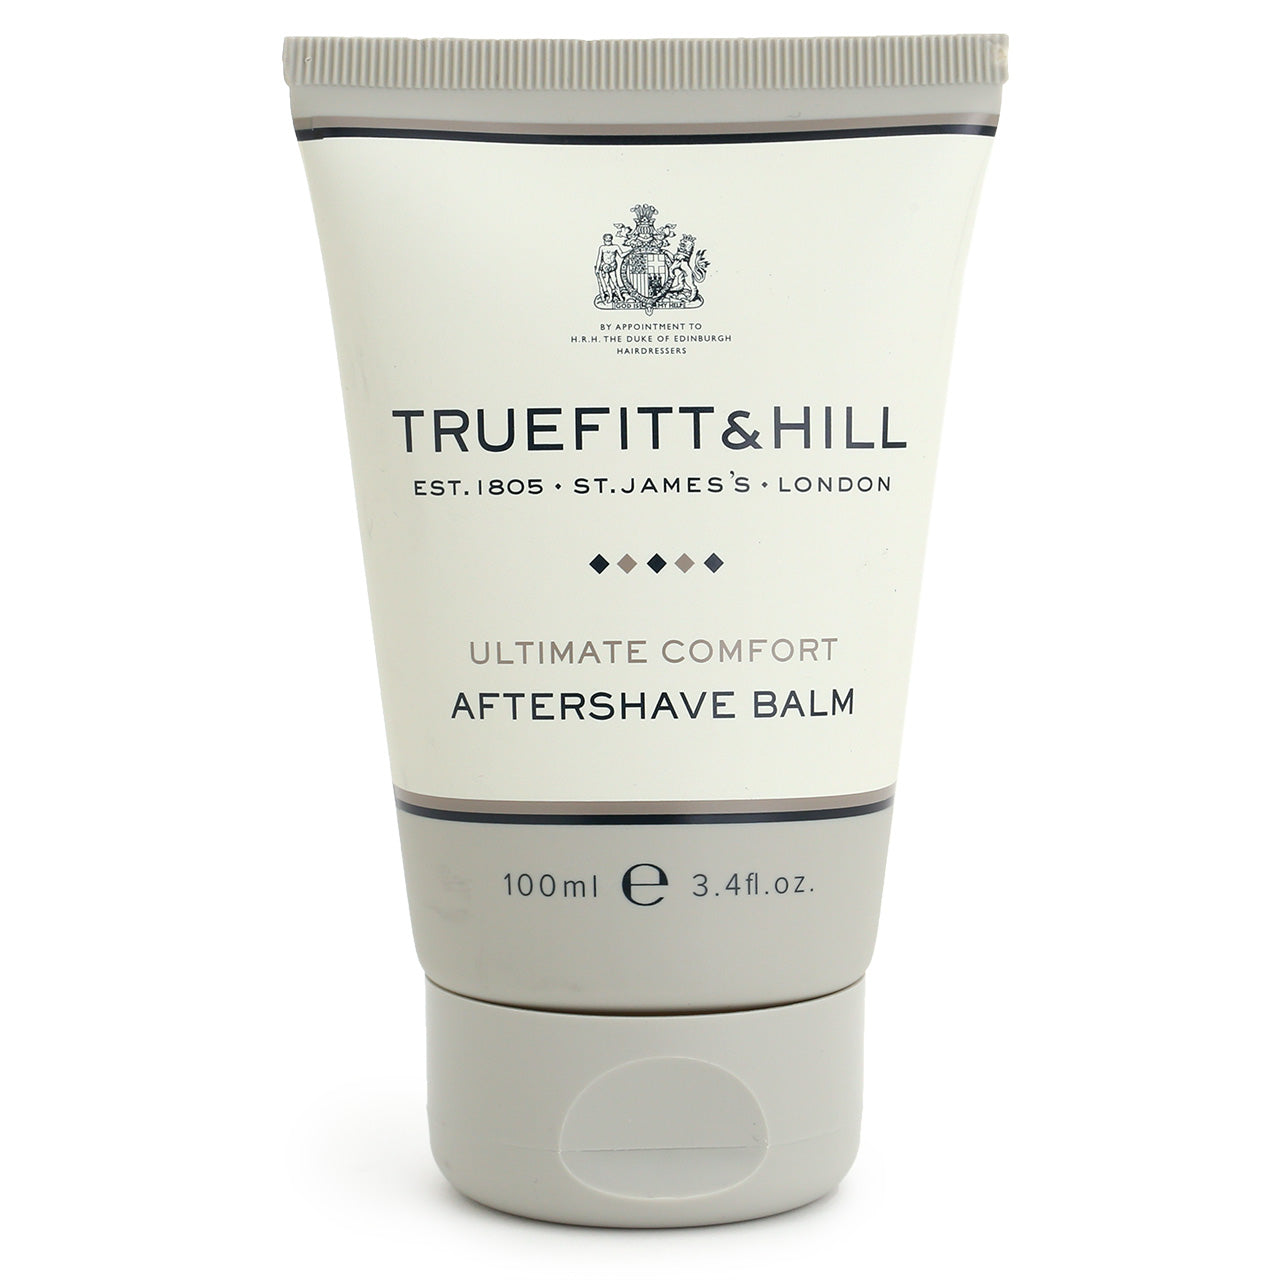 Truefitt & Hill Aftershave Balm in a 100ml tube